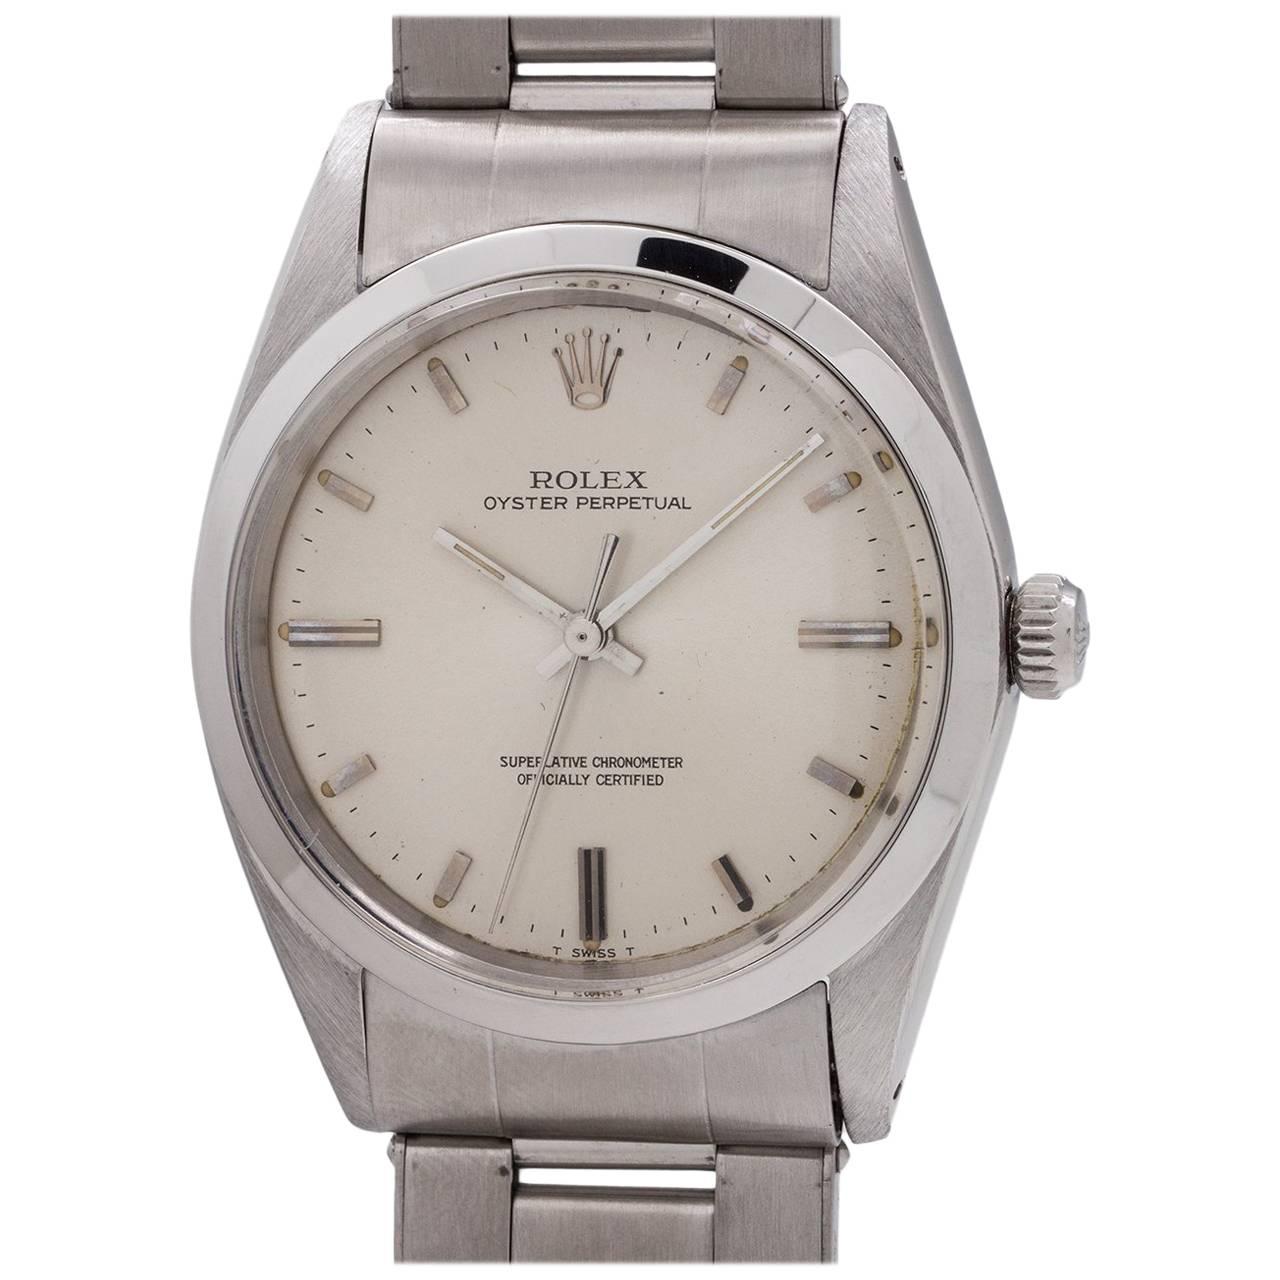 Rolex Stainless Steel Oyster Perpetual self winding wristwatch, circa 1968